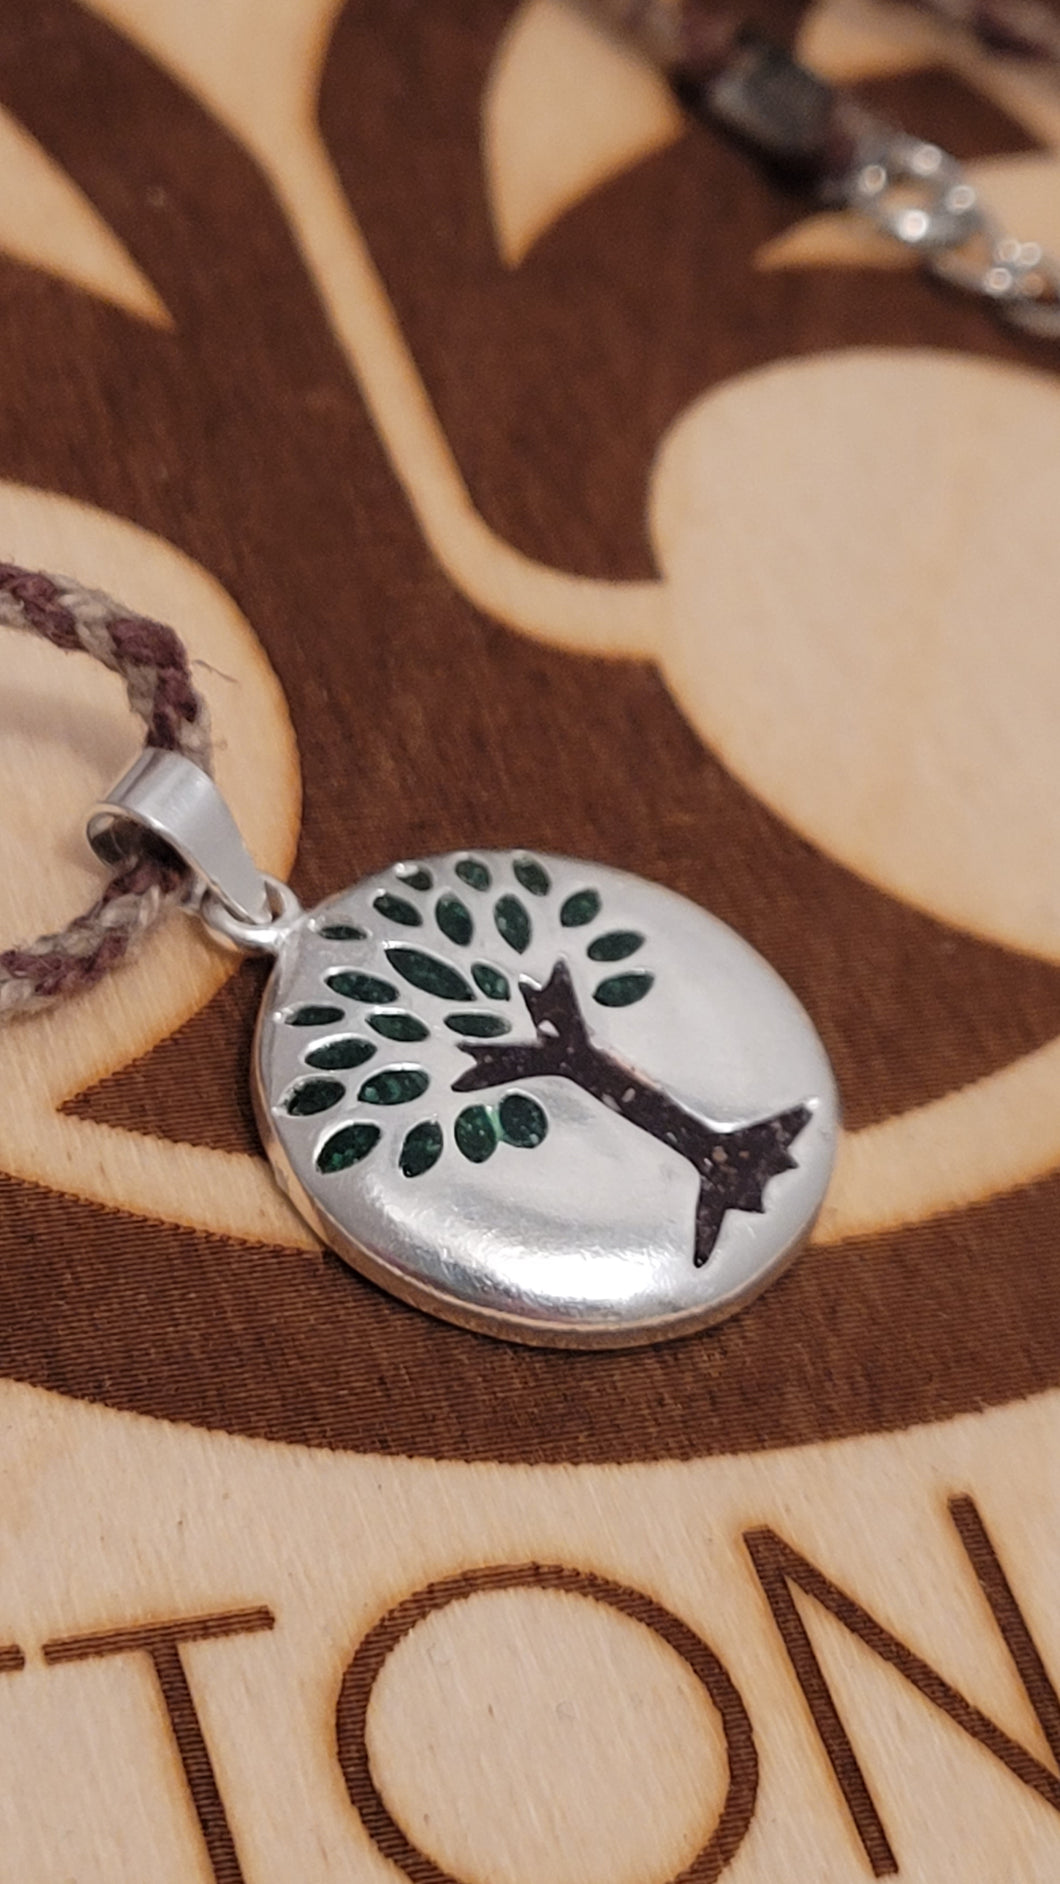 .925 Sterling Sliver Realistic Tree of Life Cremation Necklace